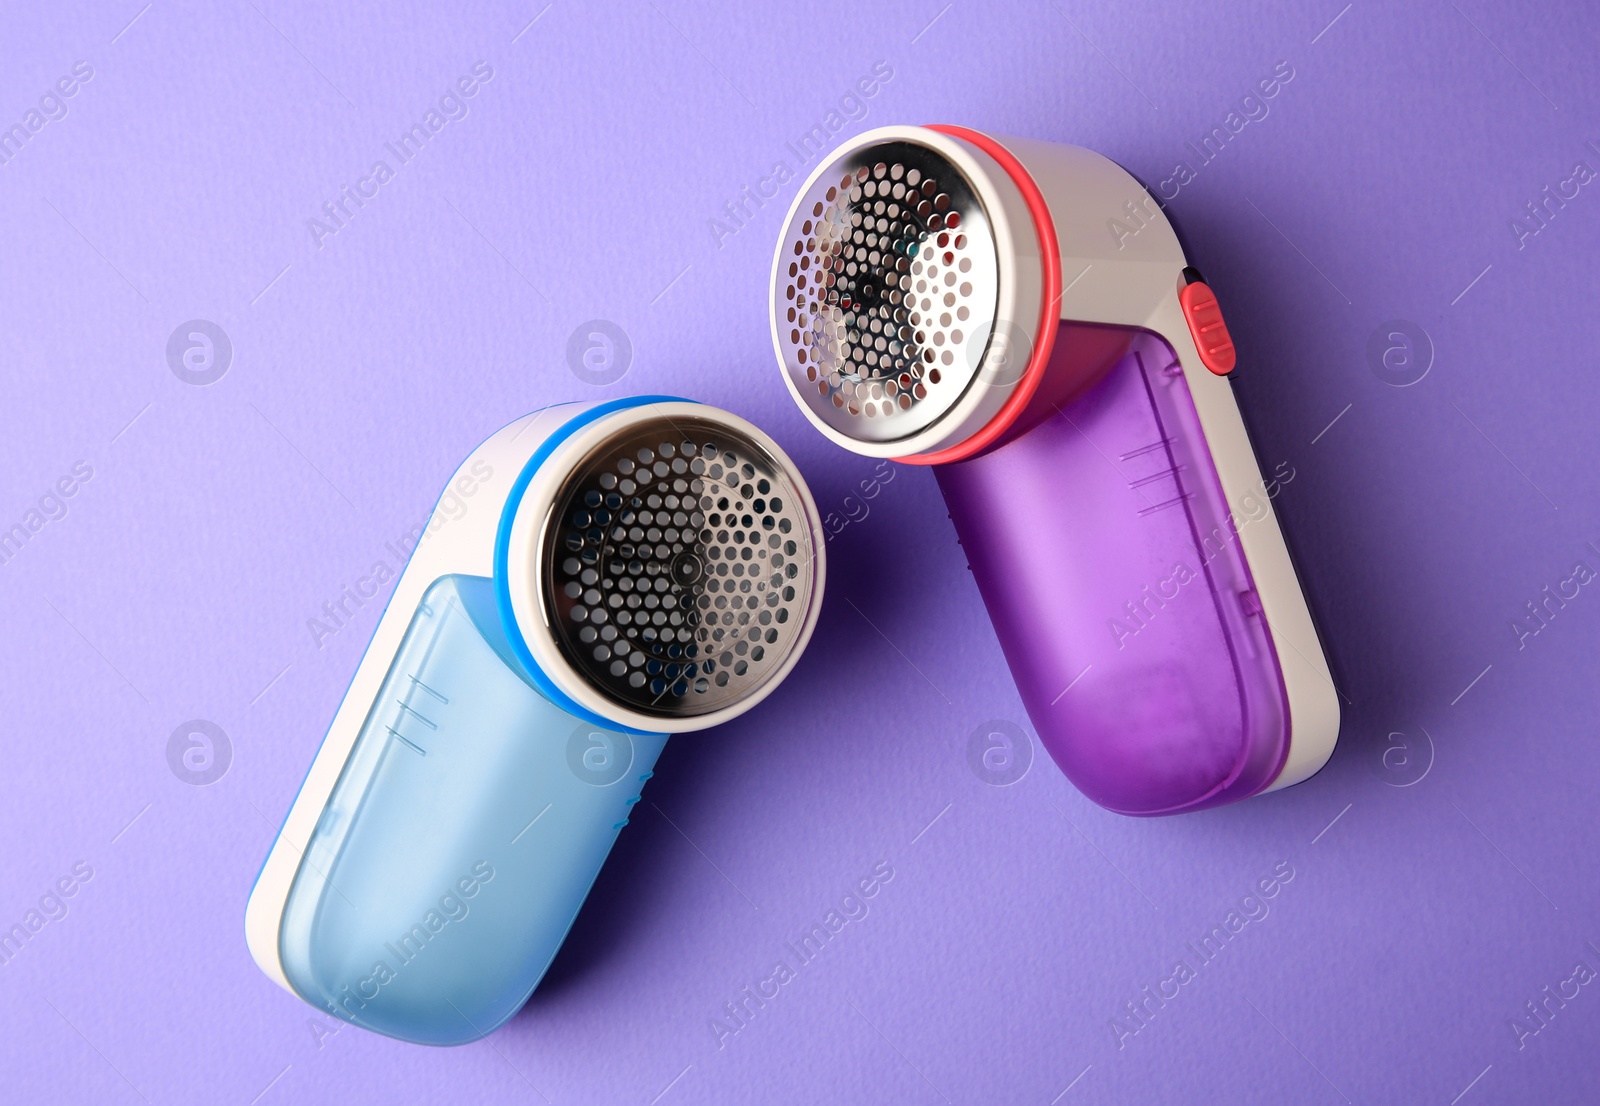 Photo of Modern fabric shaver on violet background, flat lay